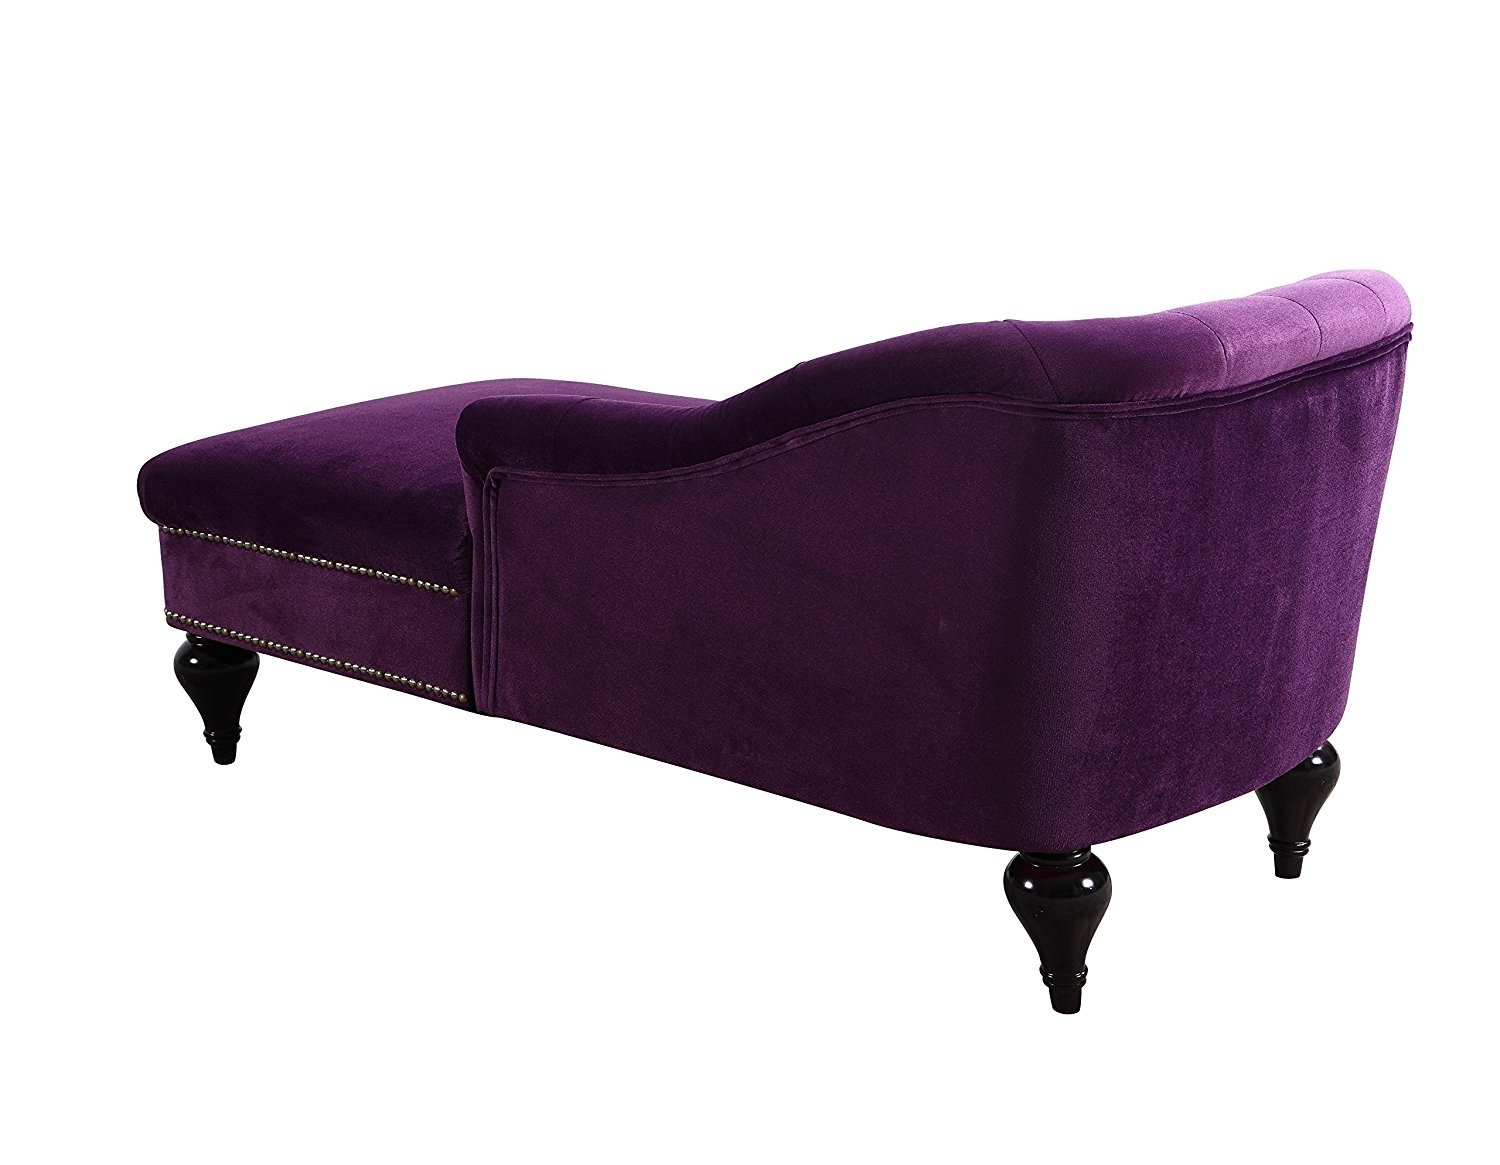 Purple Chaise Lounge For Living Room